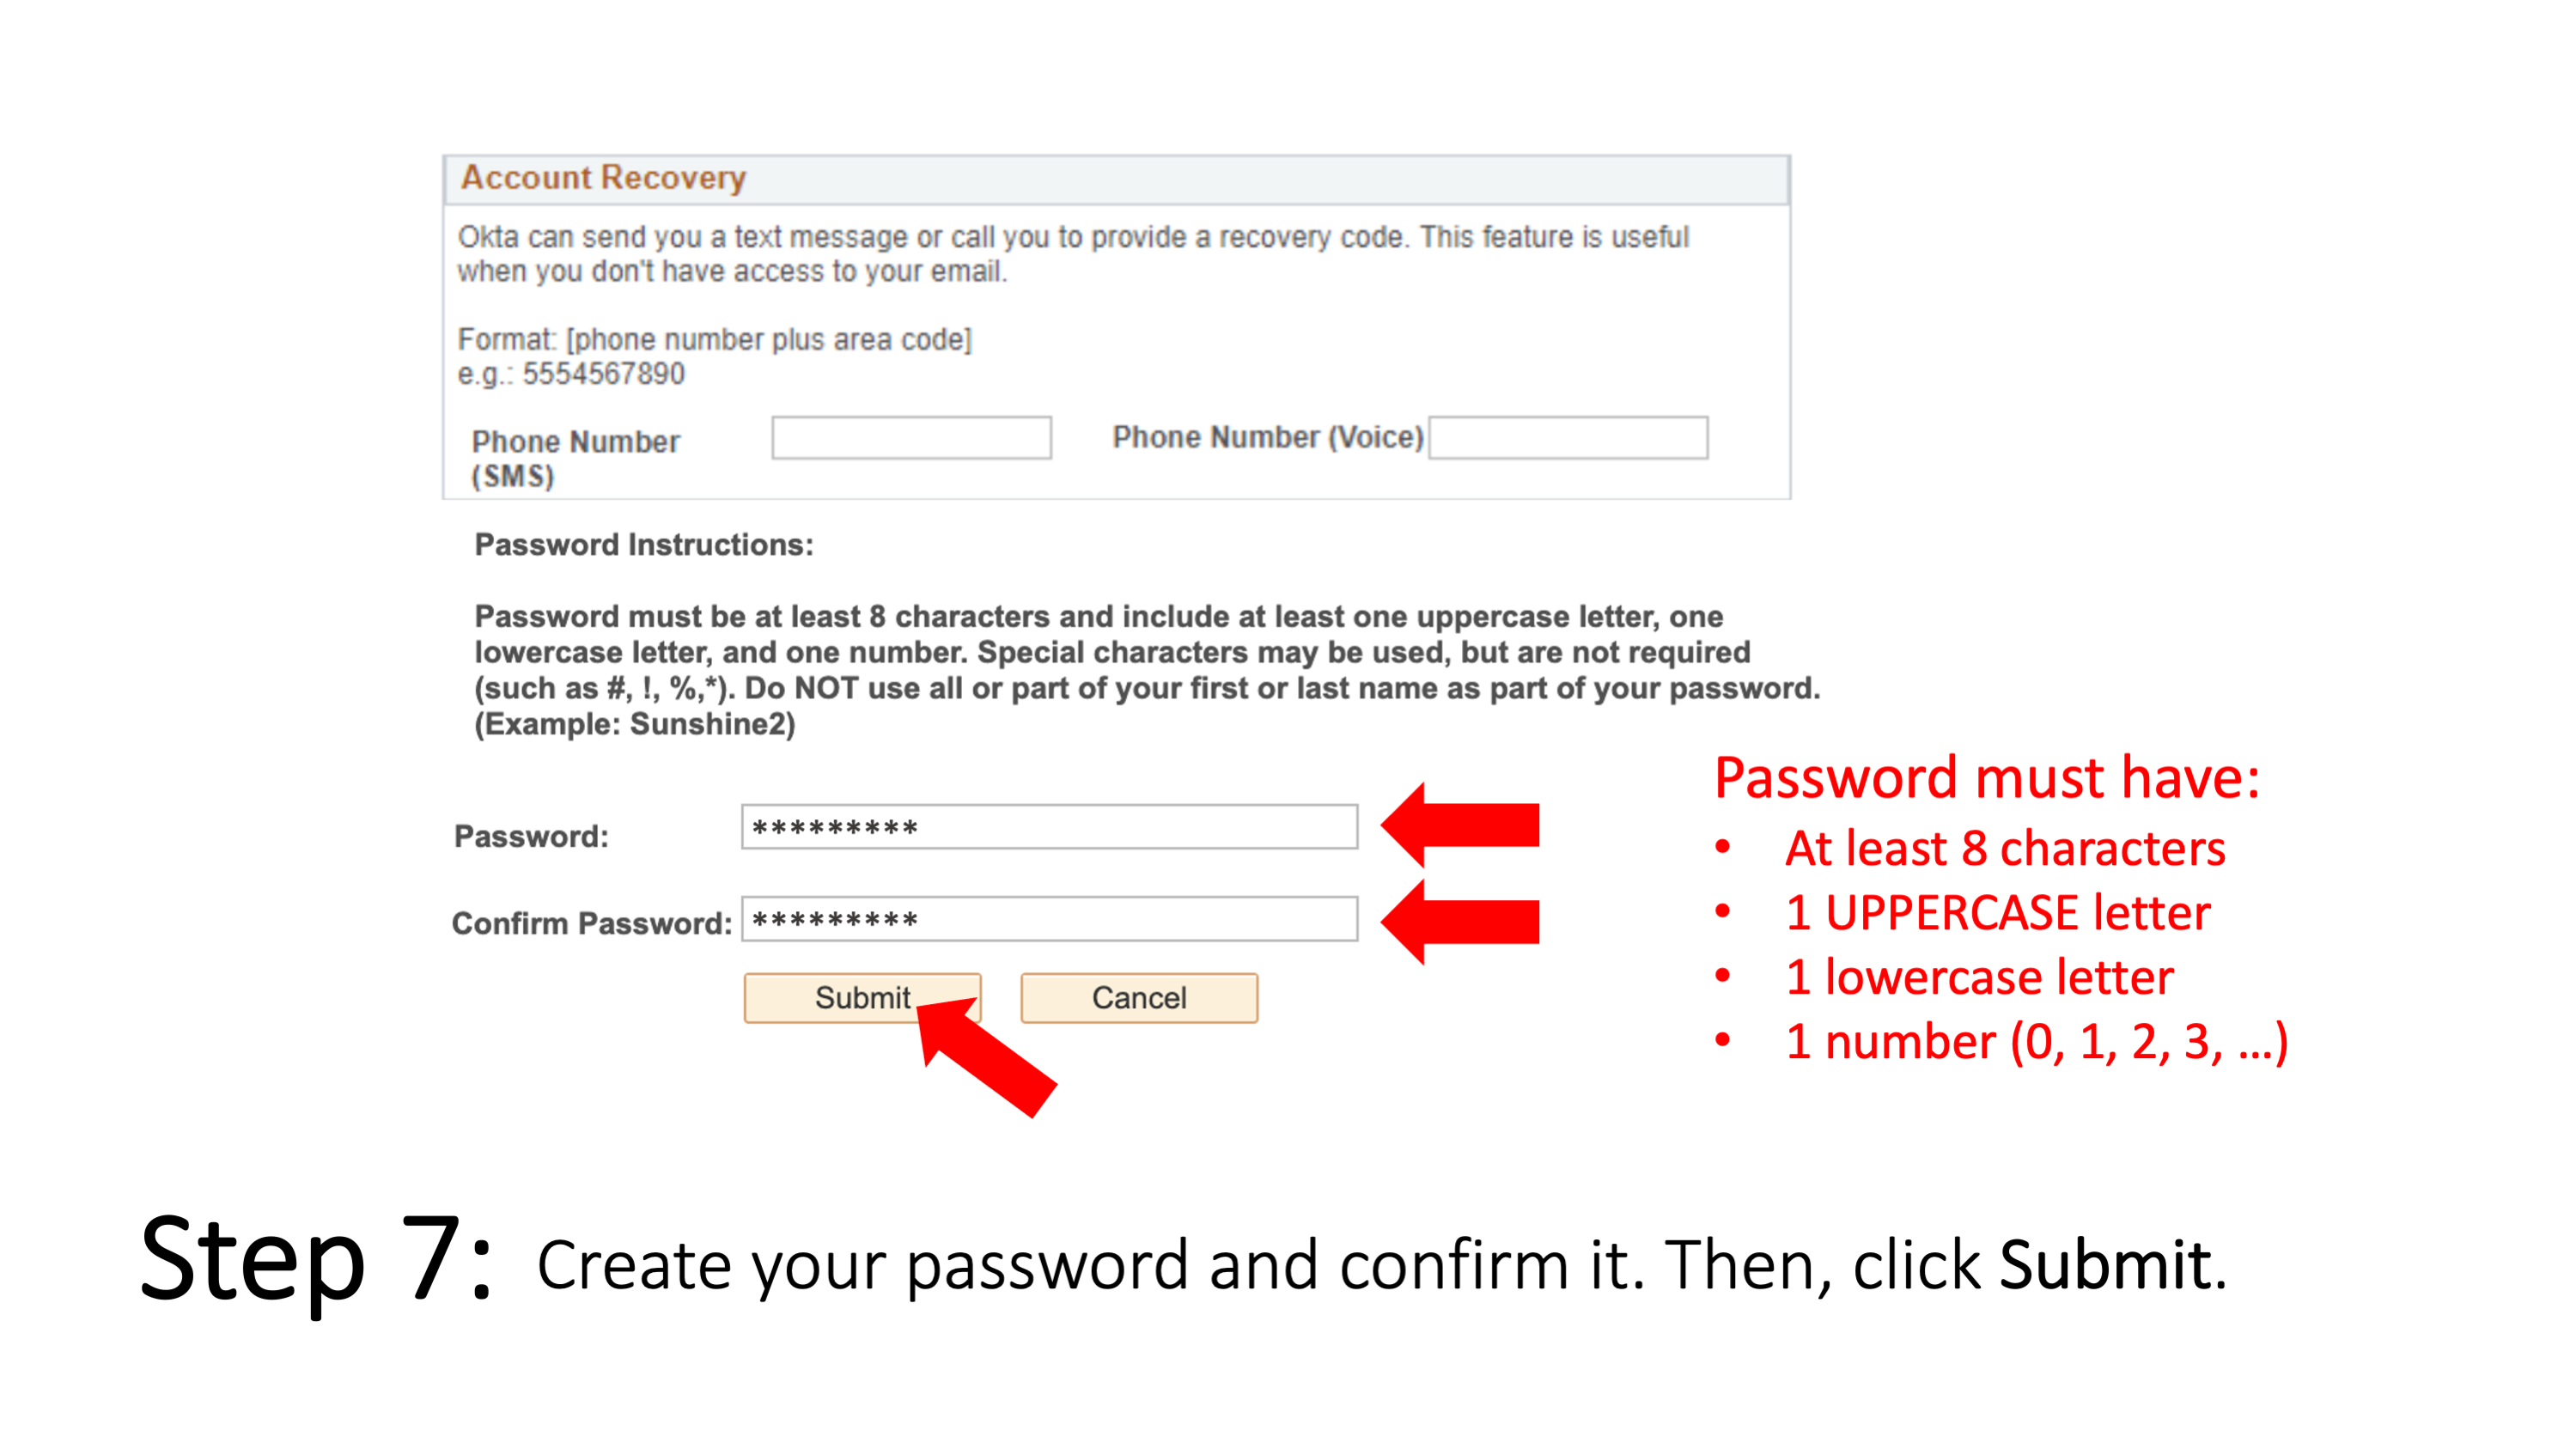 Step 7: Create your password and confirm it. Then, click Submit. Password must have: at least 8 characters, 1 uppercase letter, 1 lowercase letter, and 1 number.